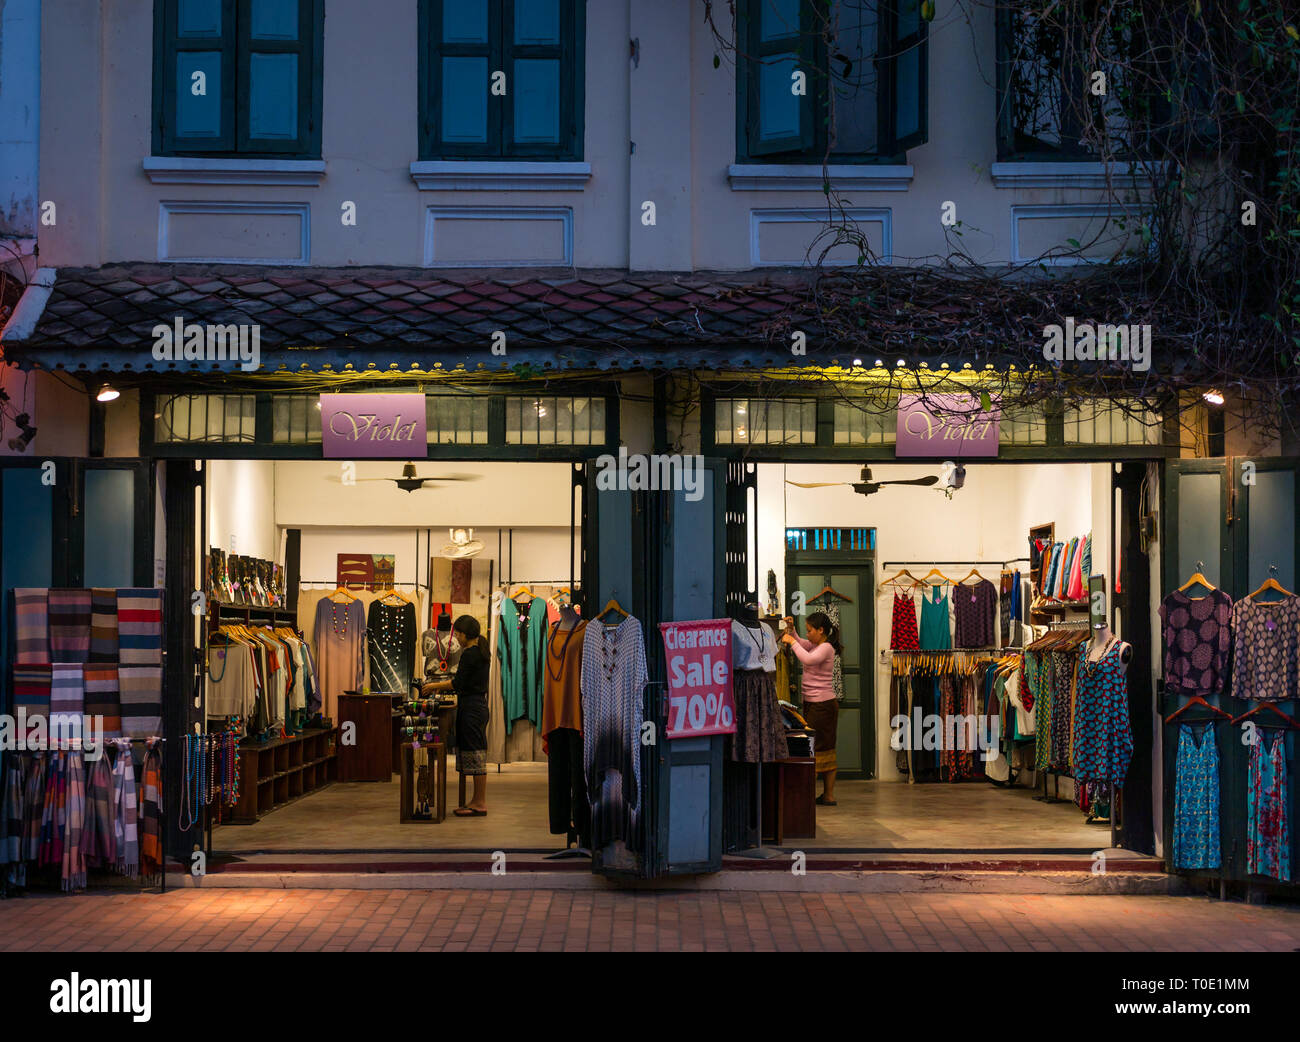 https://c8.alamy.com/comp/T0E1MM/womans-clothing-shop-called-violet-selling-dresses-shawls-and-jewellry-open-at-night-offering-sale-up-to-70-off-luang-prabang-laos-se-asia-T0E1MM.jpg